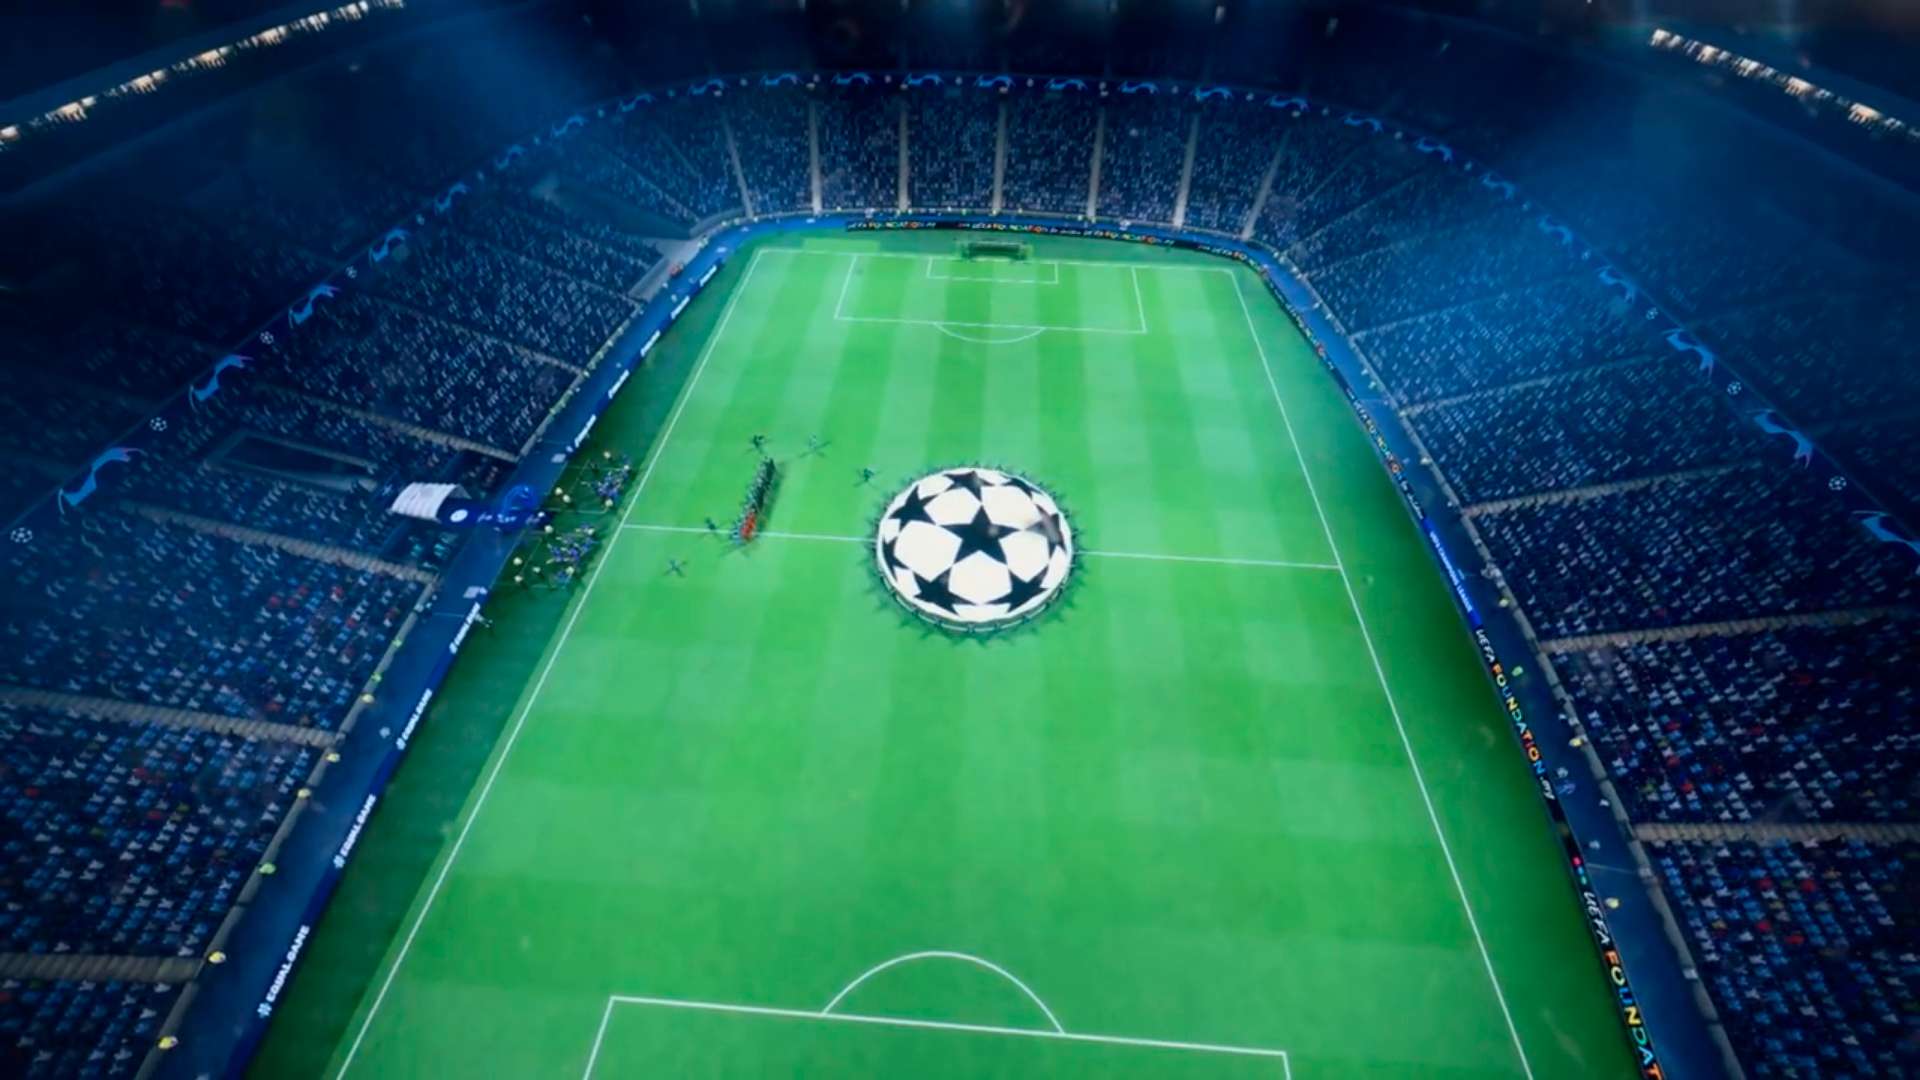 Champions League FIFA 19 game footage